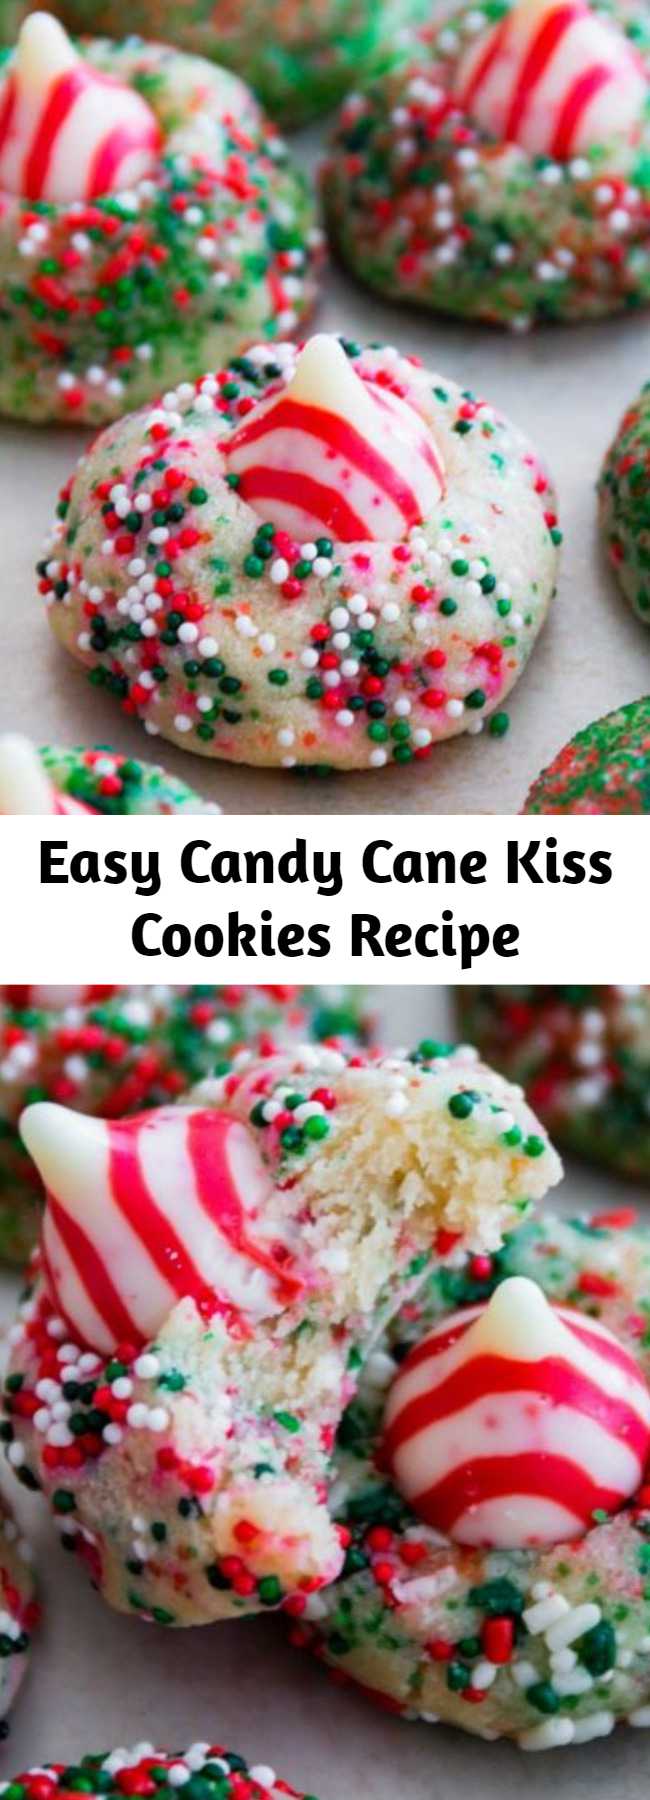 Easy Candy Cane Kiss Cookies Recipe - Festive sugar cookies and chocolate cookies stuffed with a Candy Cane Hershey Kiss. Soft, chewy, and easy to make!